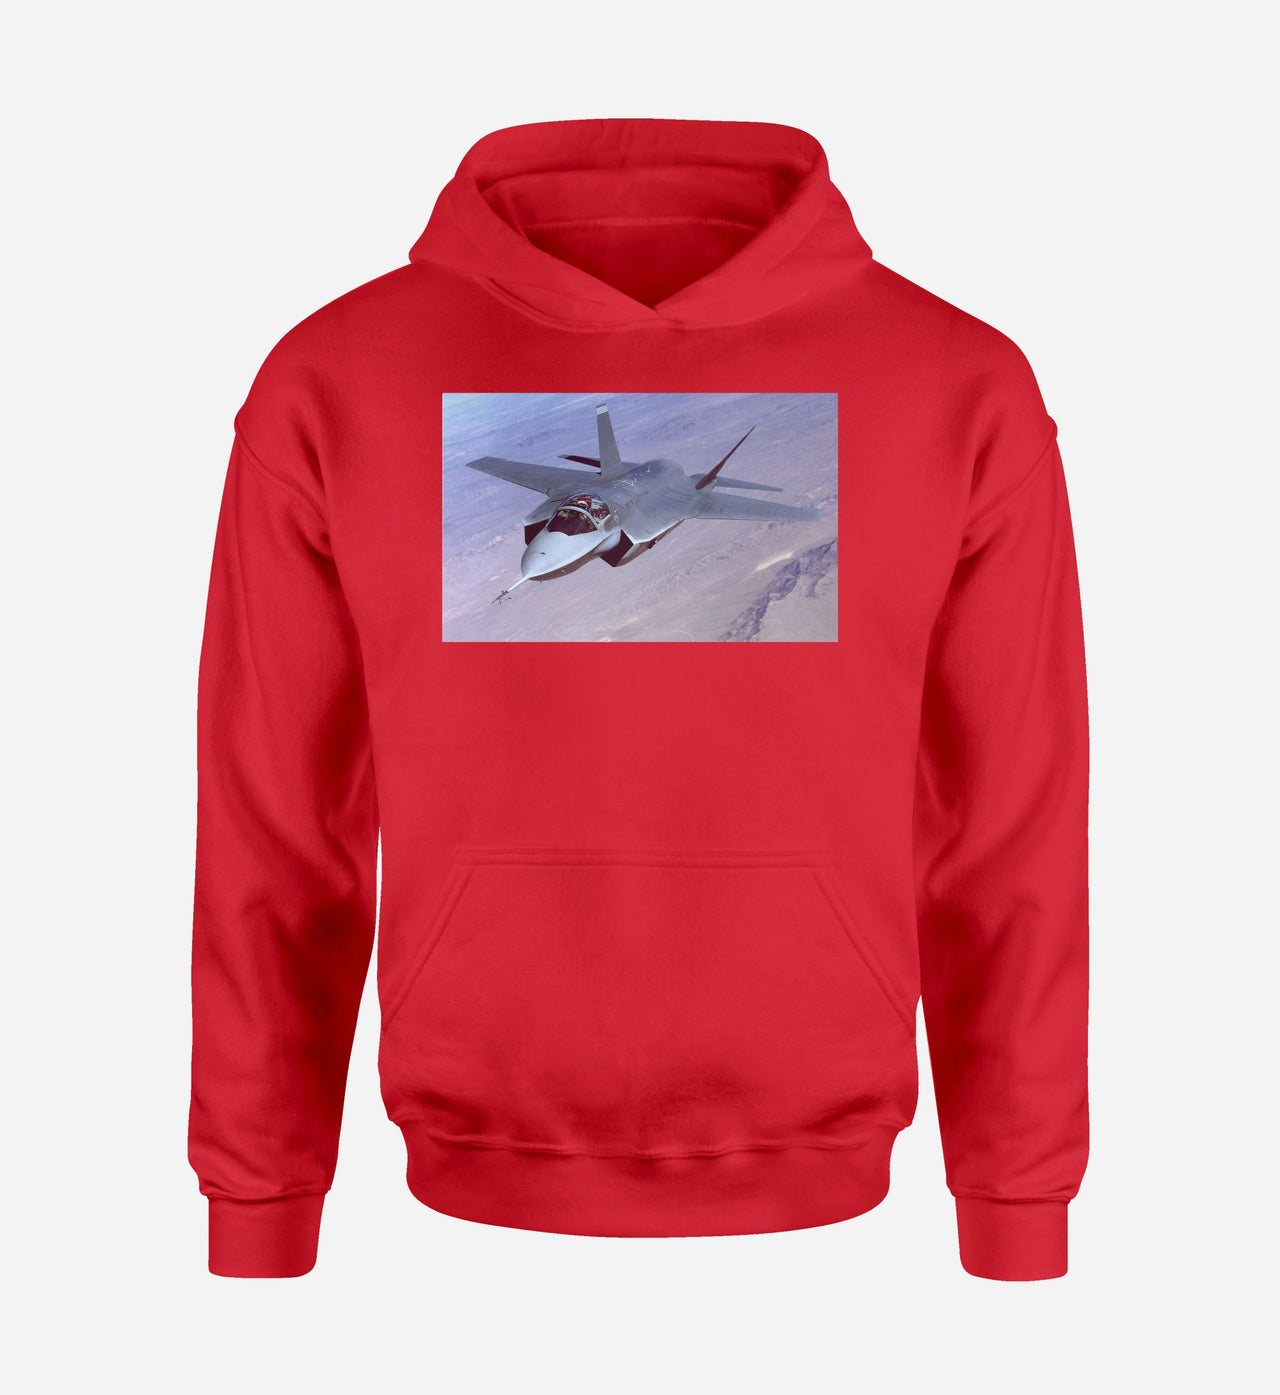 Fighting Falcon F35 Captured in the Air Designed Hoodies